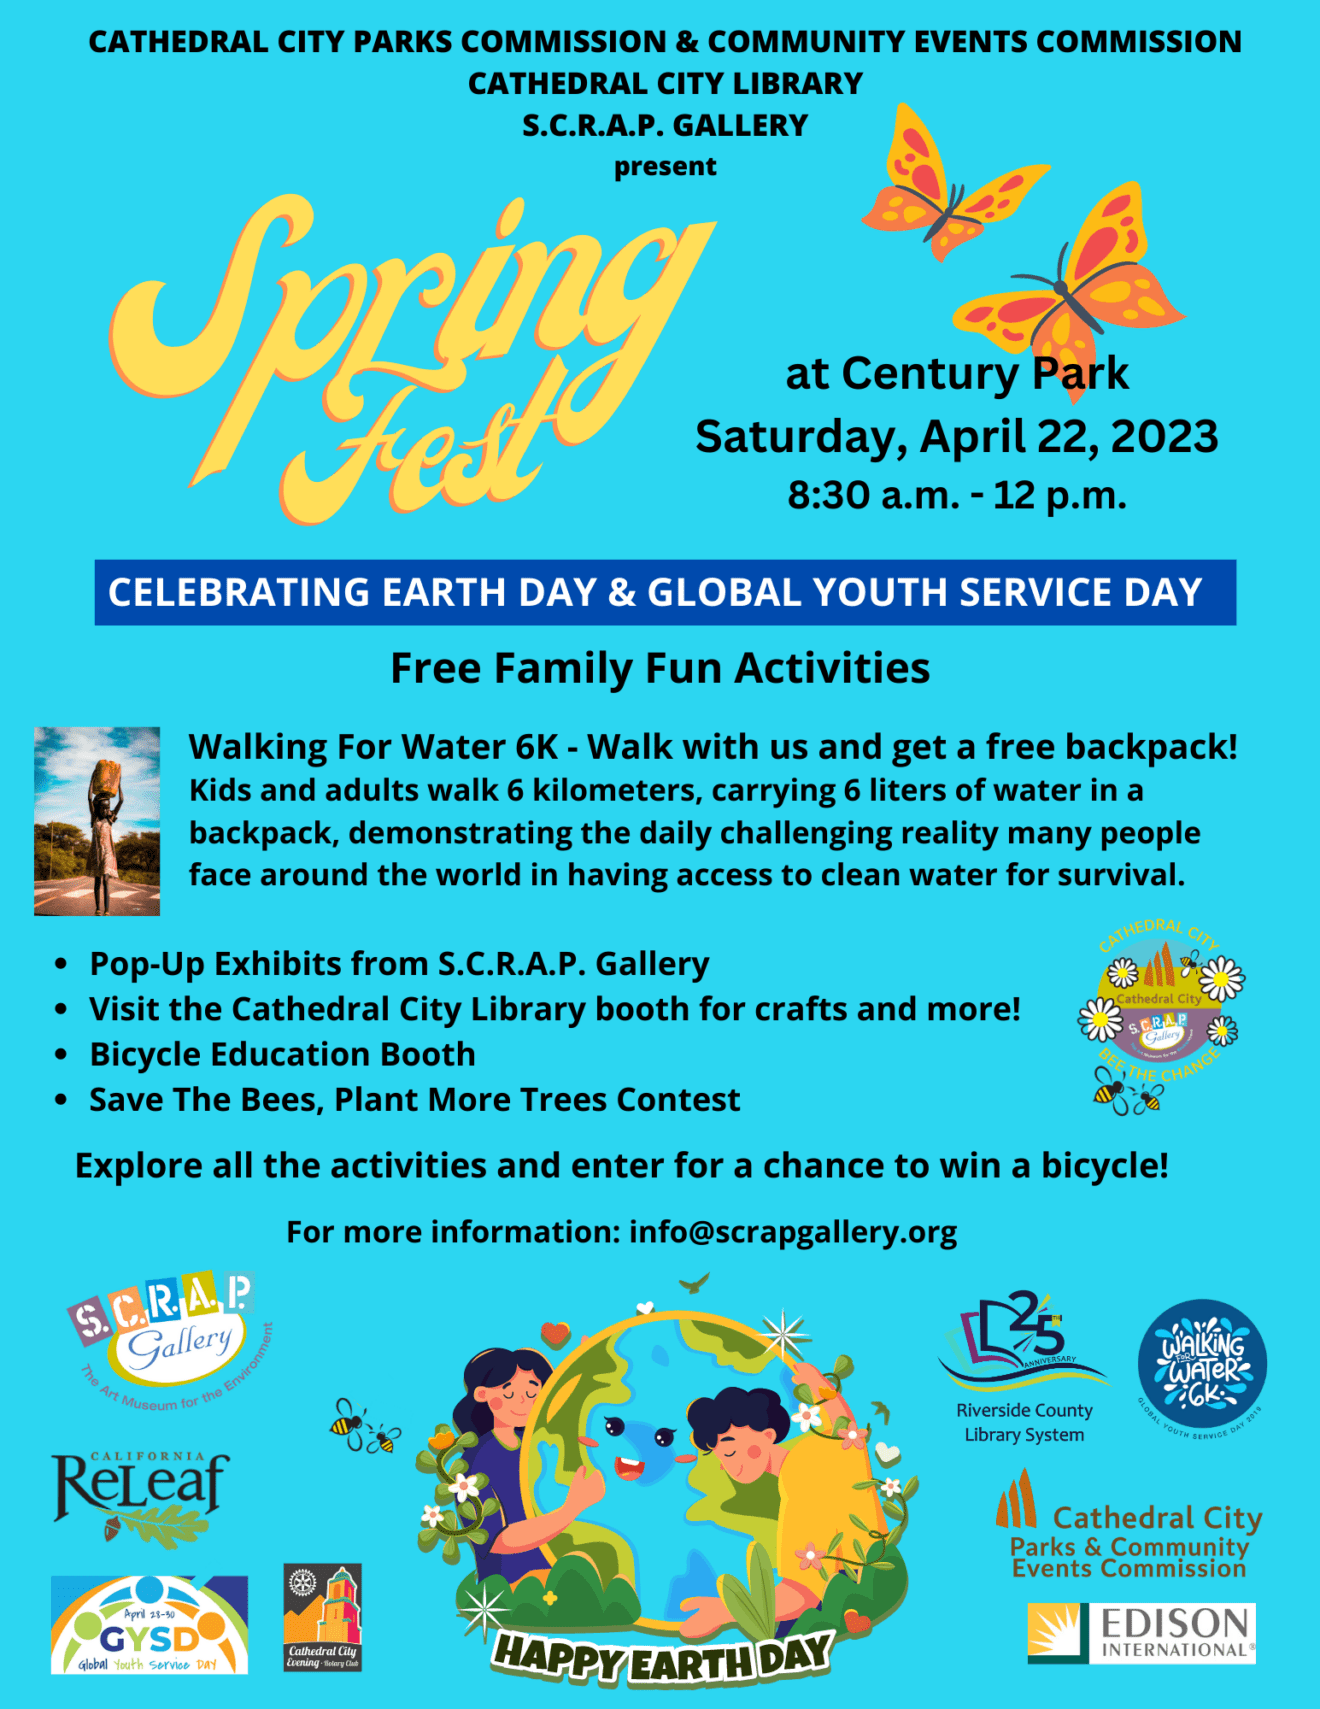 Celebrate Earth Day & Global Youth Service Day With S.C.R.A.P. Gallery at Spring Fest, April 22, 2023